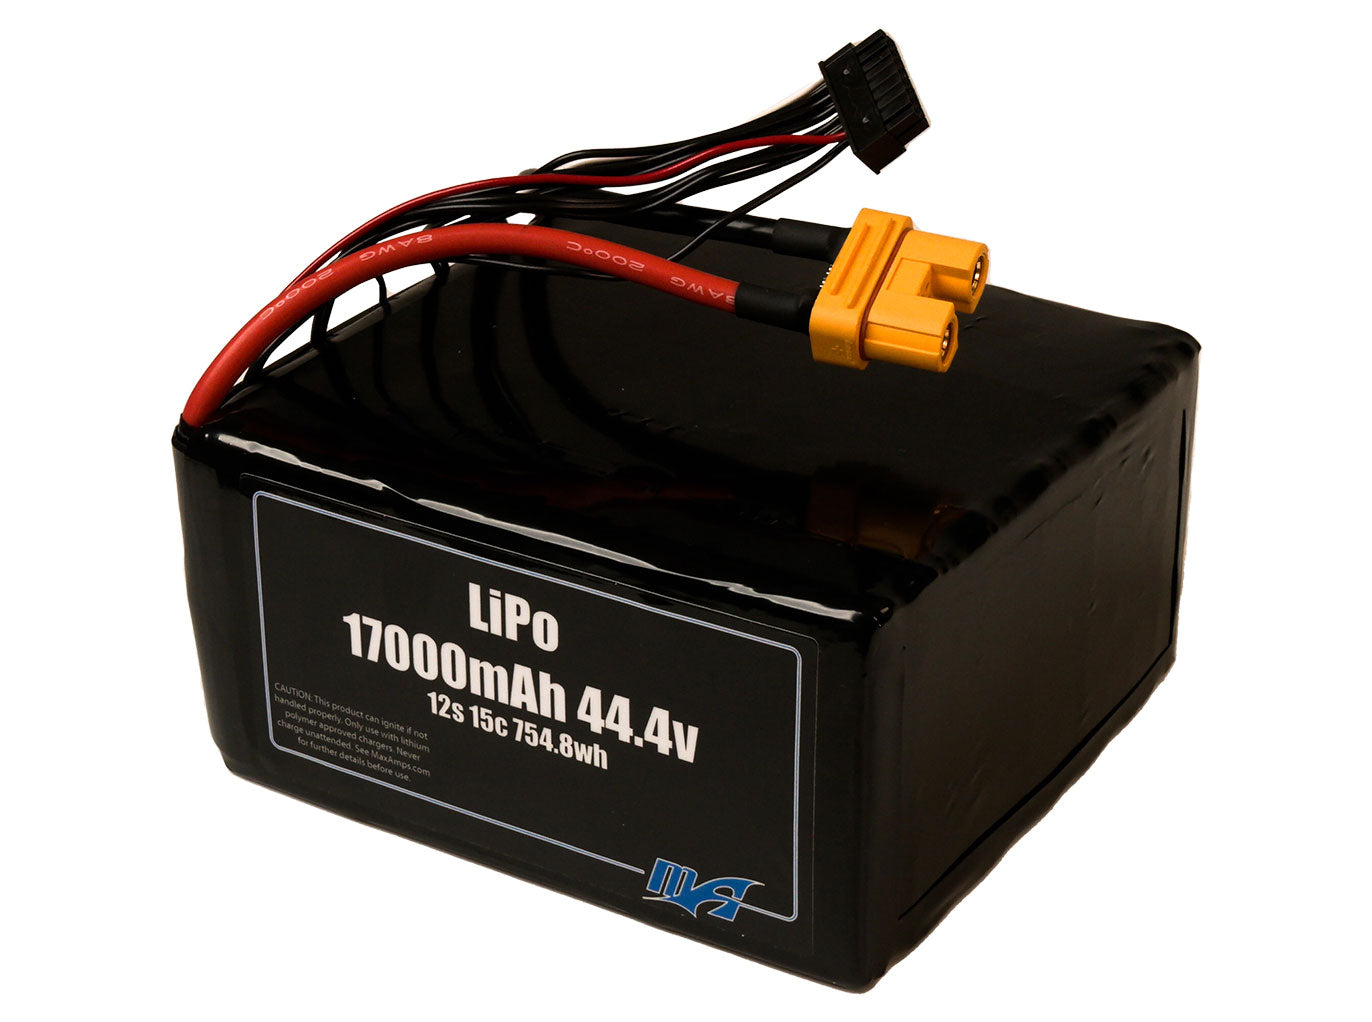 LiPo 17000 12S 44.4v Smart Battery Pack With AS150U Female And 16 Pin Molex Micro Fit 3.0 Balance Lead